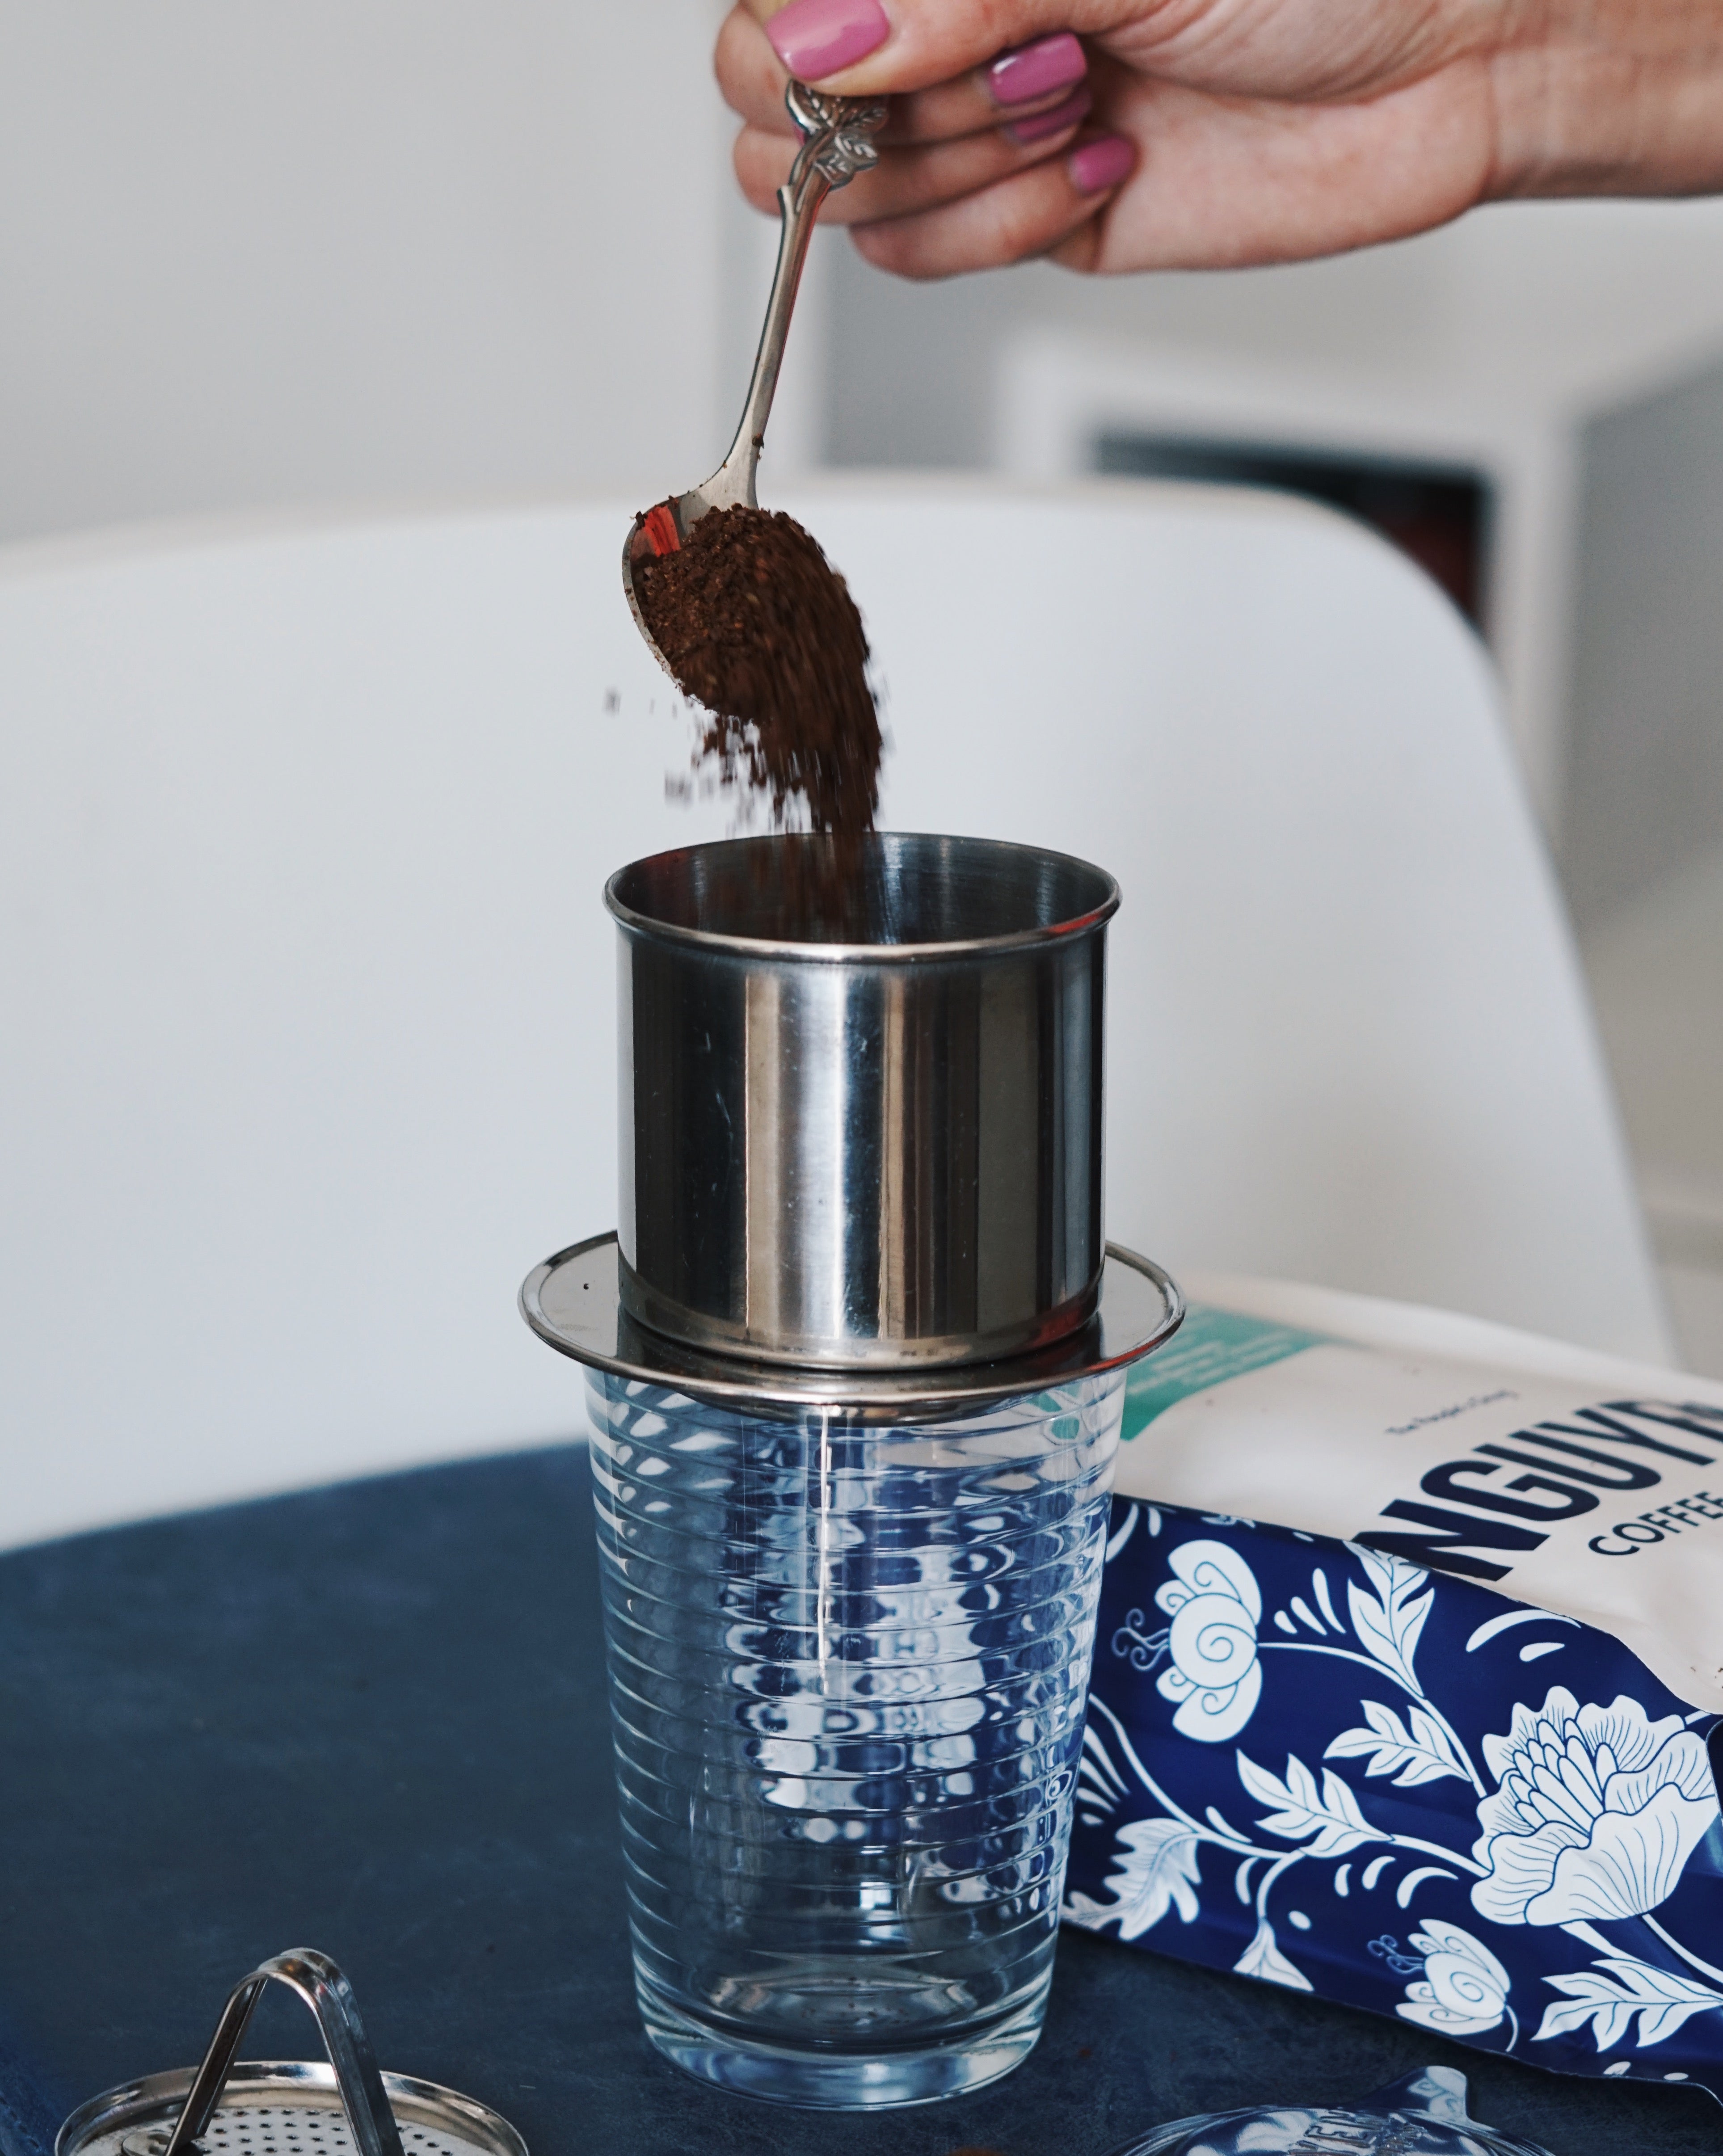 Dialing In Your Phin: How to Make the Best Vietnamese Phin Coffee